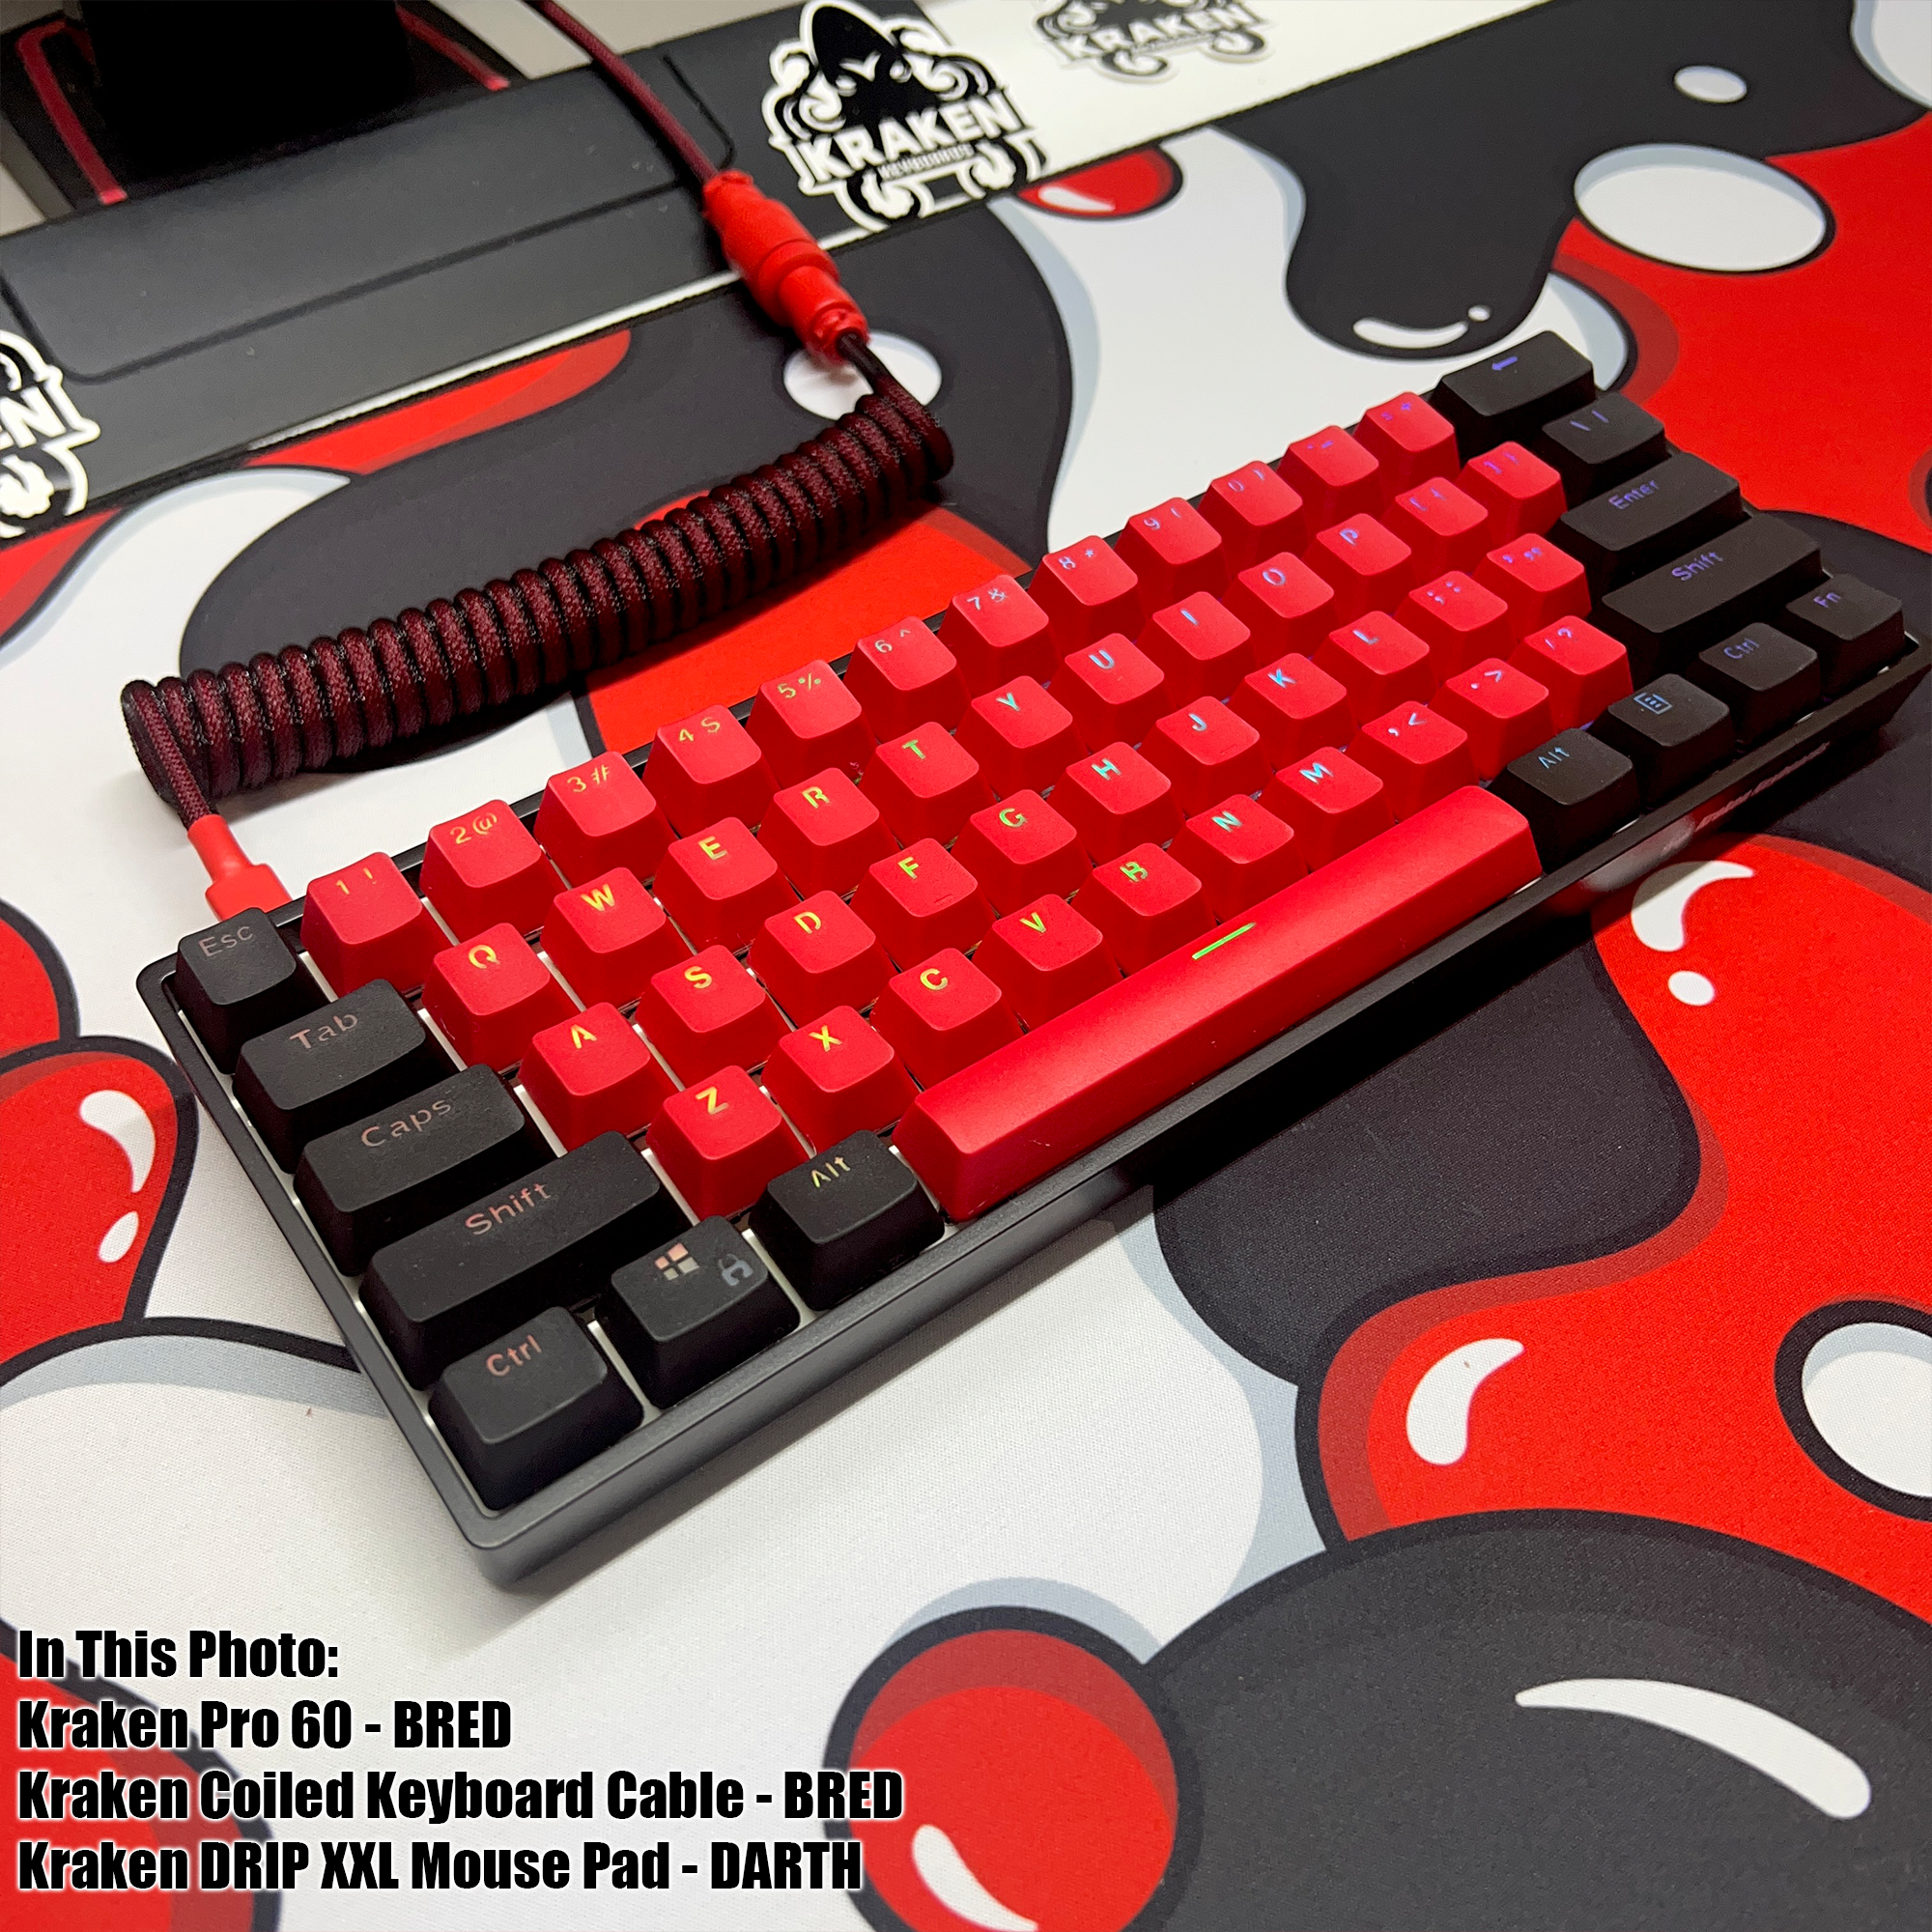 BRED Keyboard + COILED CABLE + MOUSE PAD Bundle